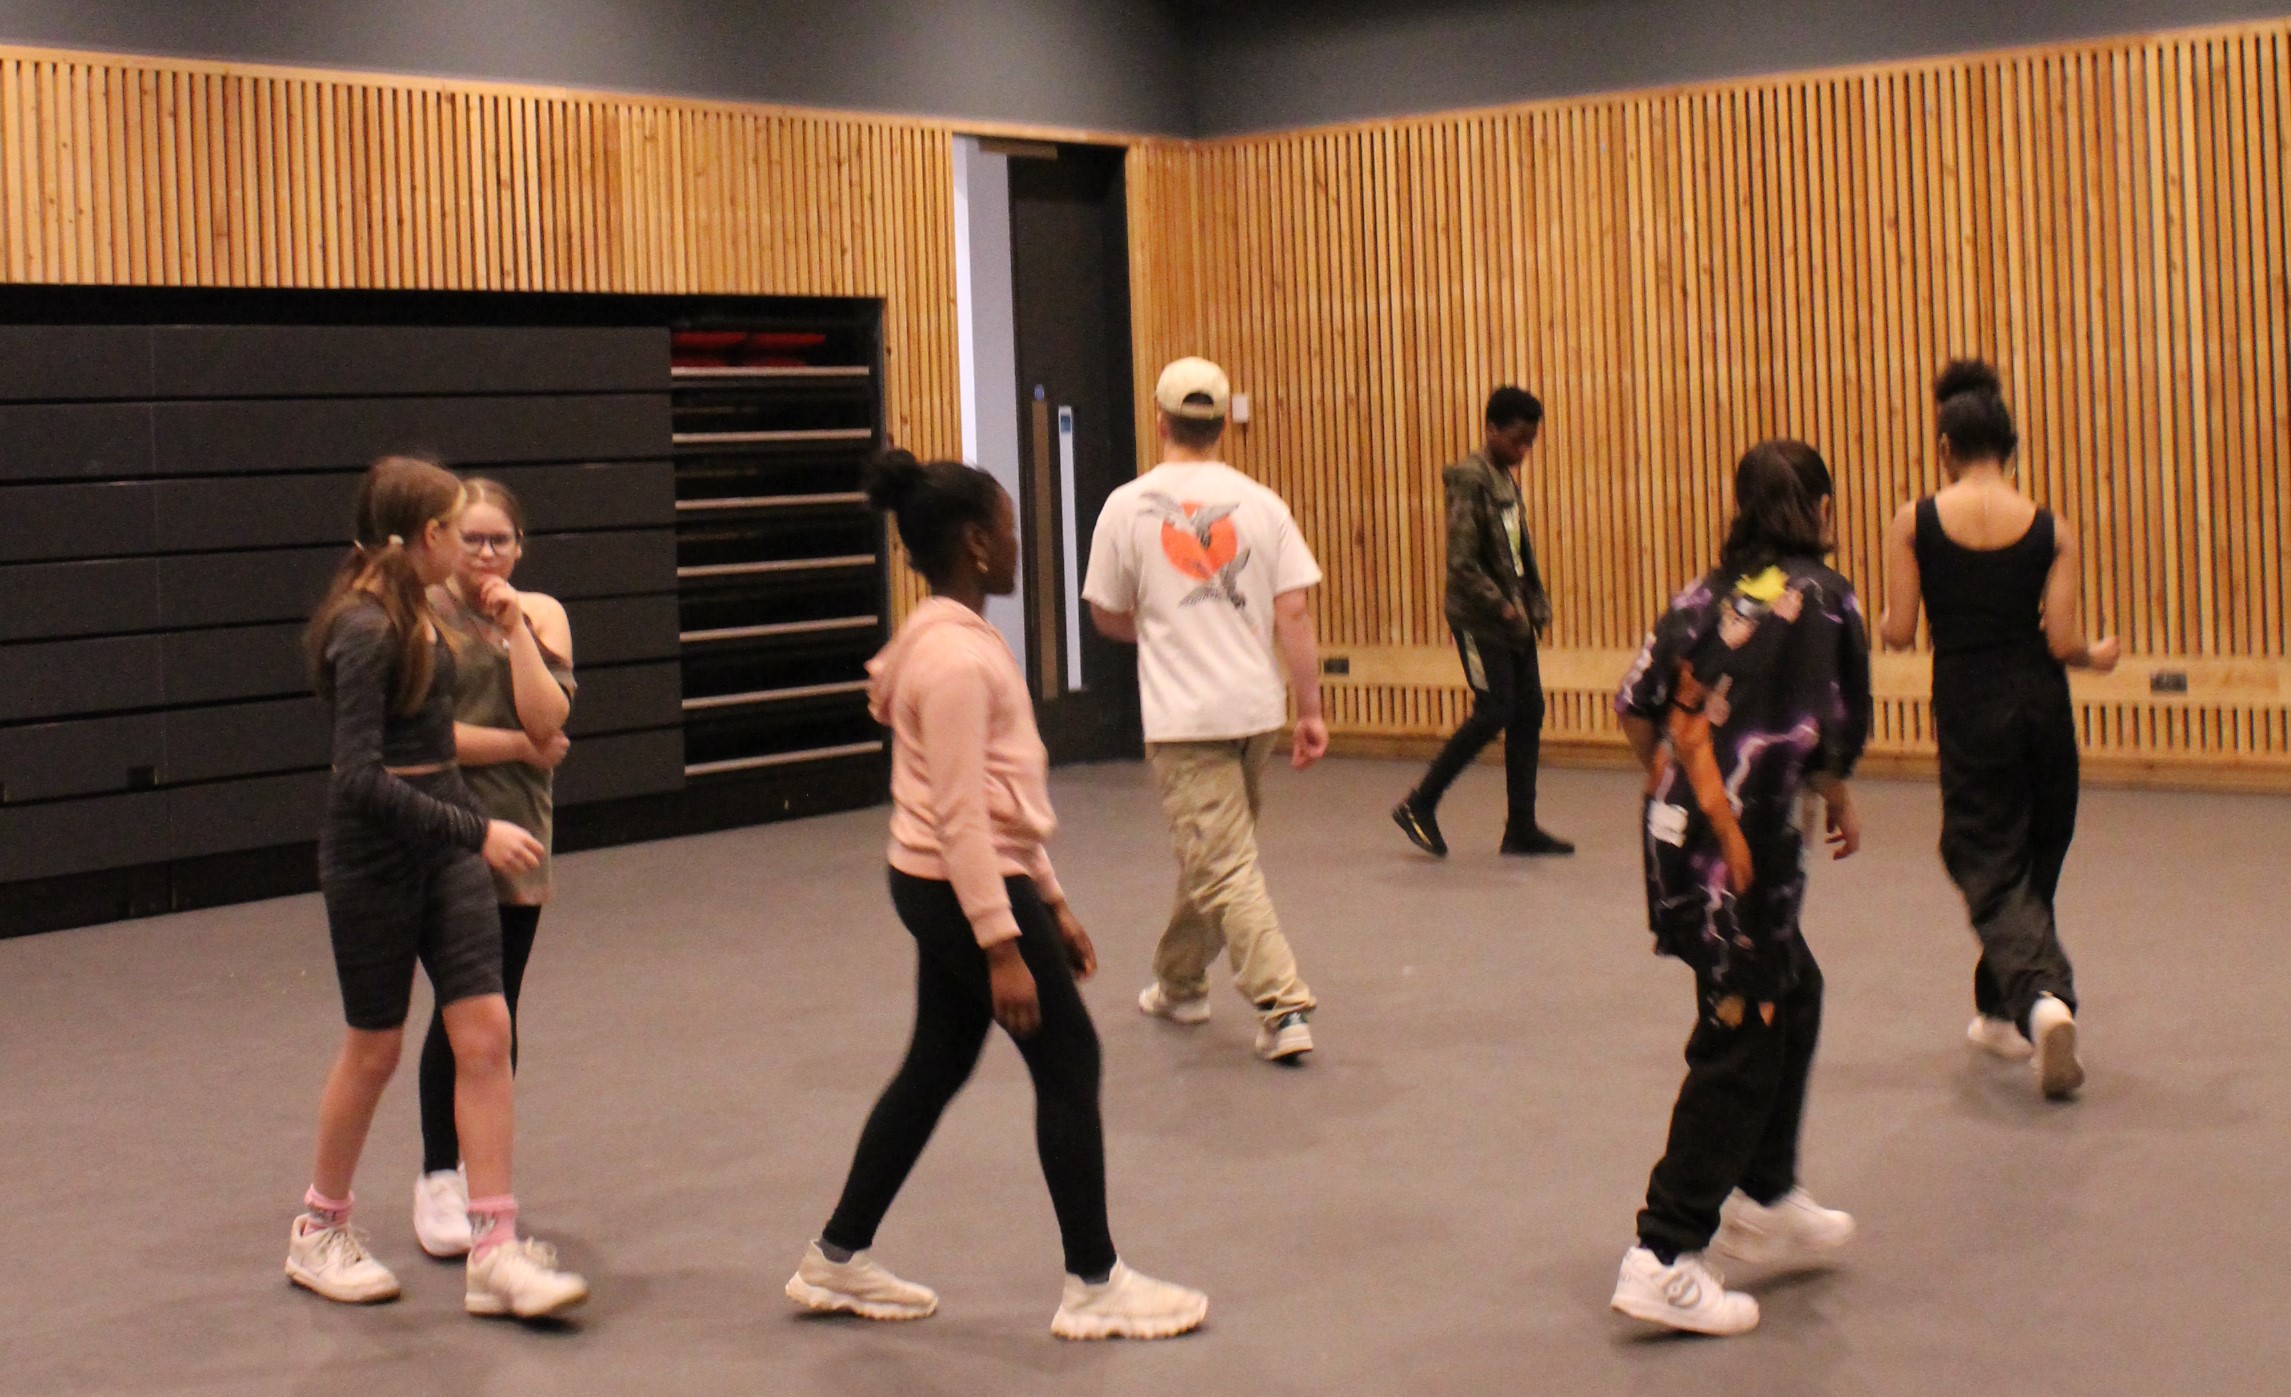 Dancer Tom Hughes Lloyd leading a group of young people in a movement activity.